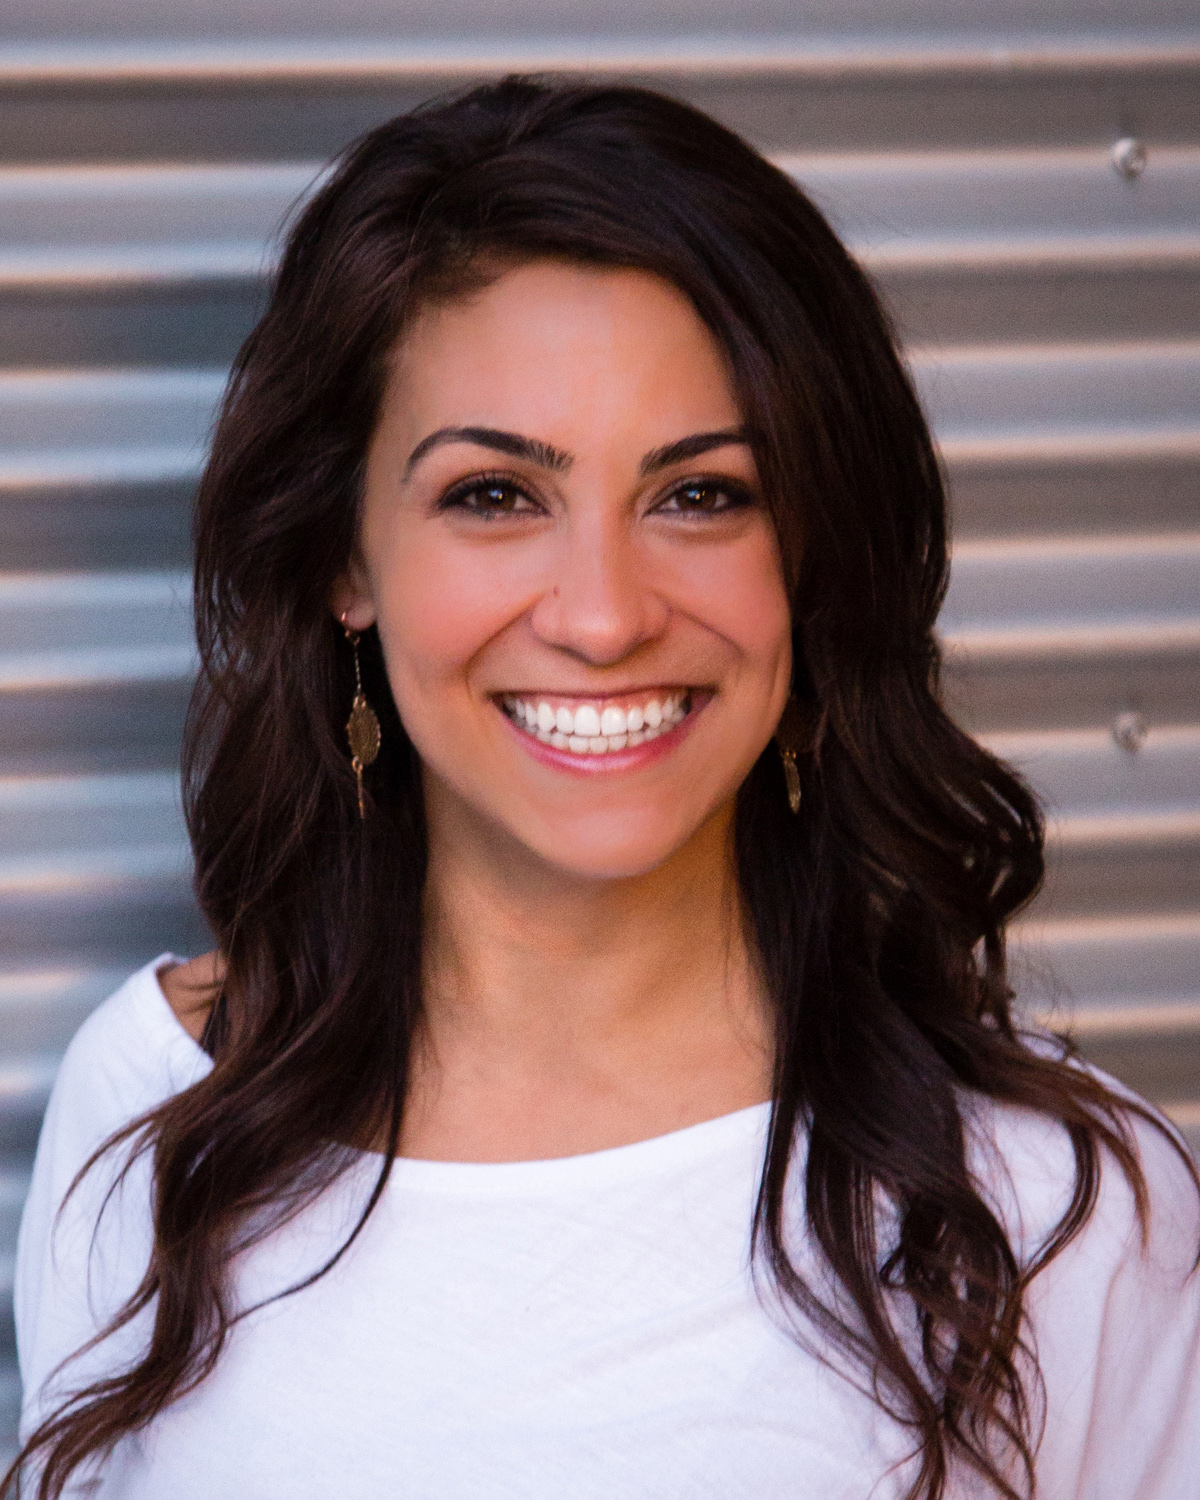 Fresh-Aire UV has promoted Marissa Granados to National Sales Manager ...